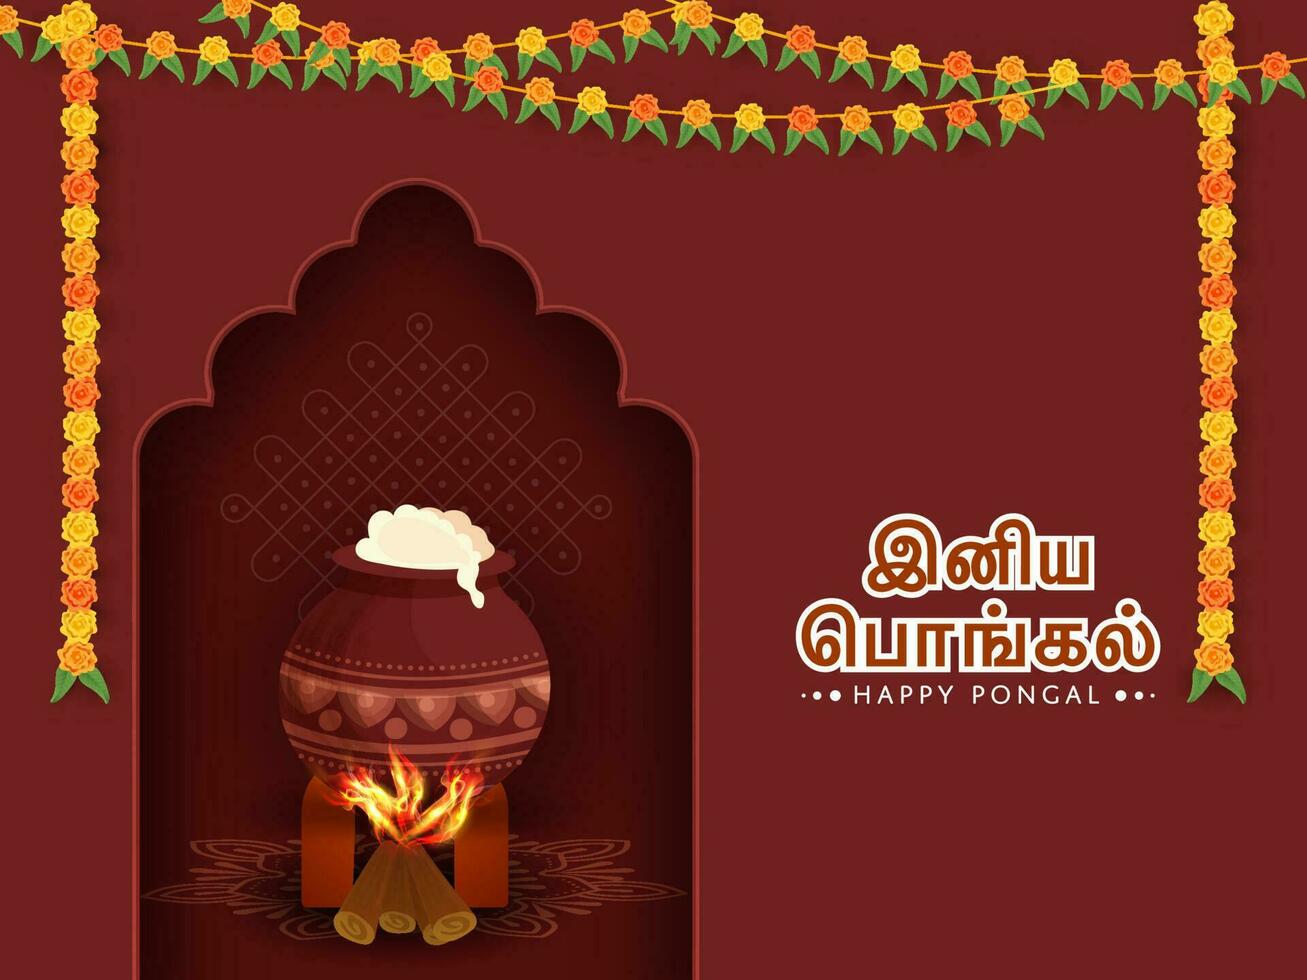 Sticker Style Happy Pongal Text Written In Tamil Language With Cooking Food Pot Over Firewood And Floral Garland Decorated On Burnt Umber Kolam Background. vector